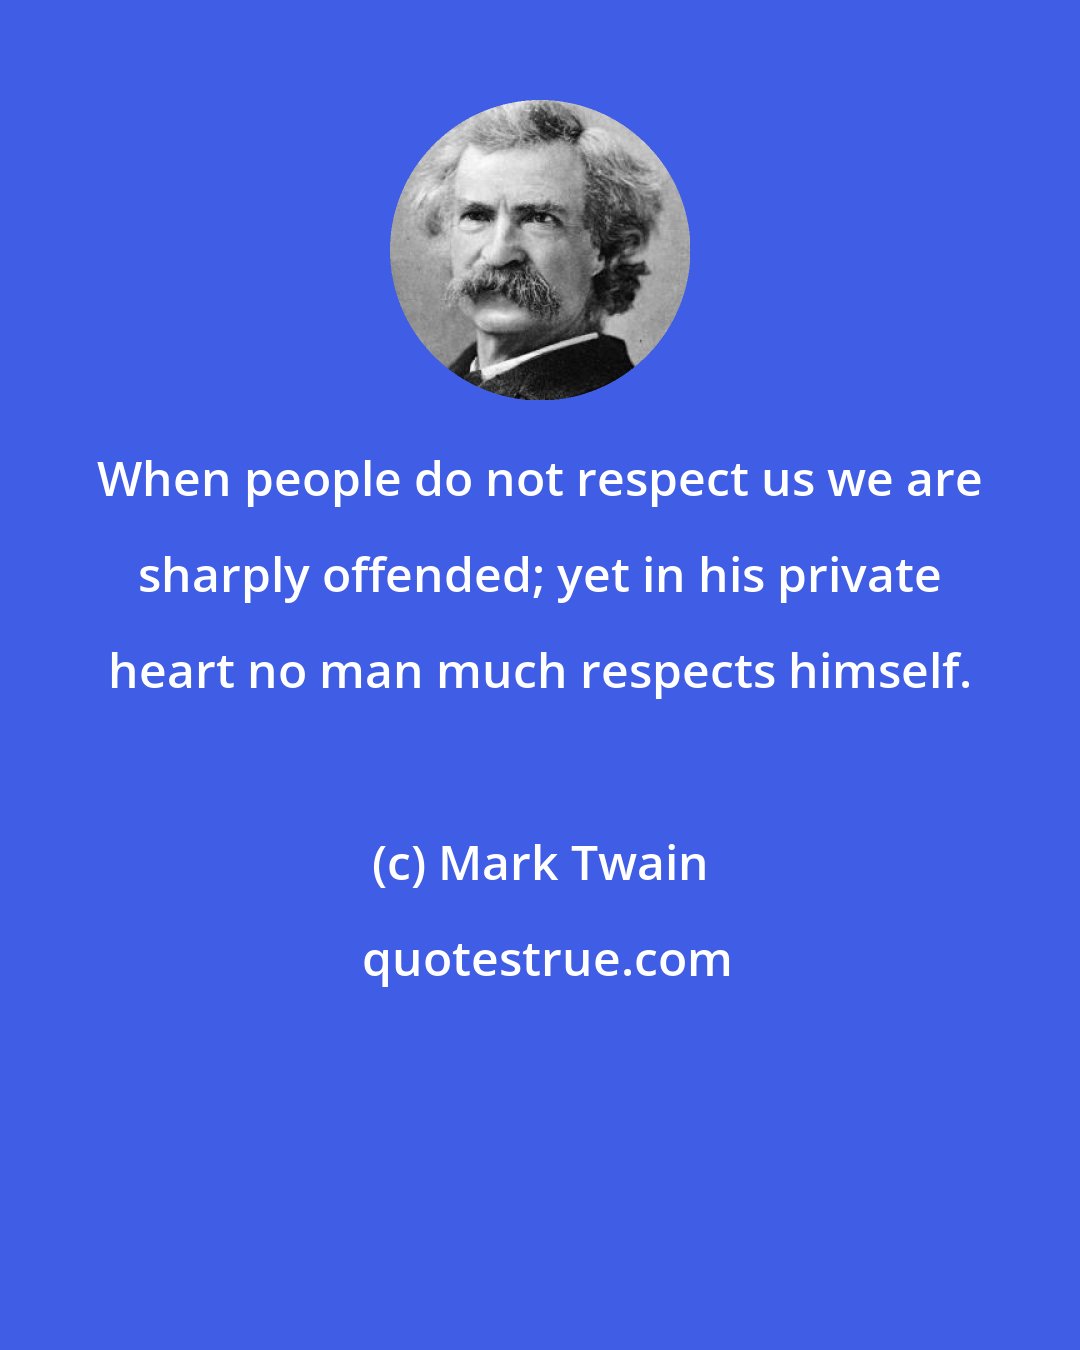 Mark Twain: When people do not respect us we are sharply offended; yet in his private heart no man much respects himself.